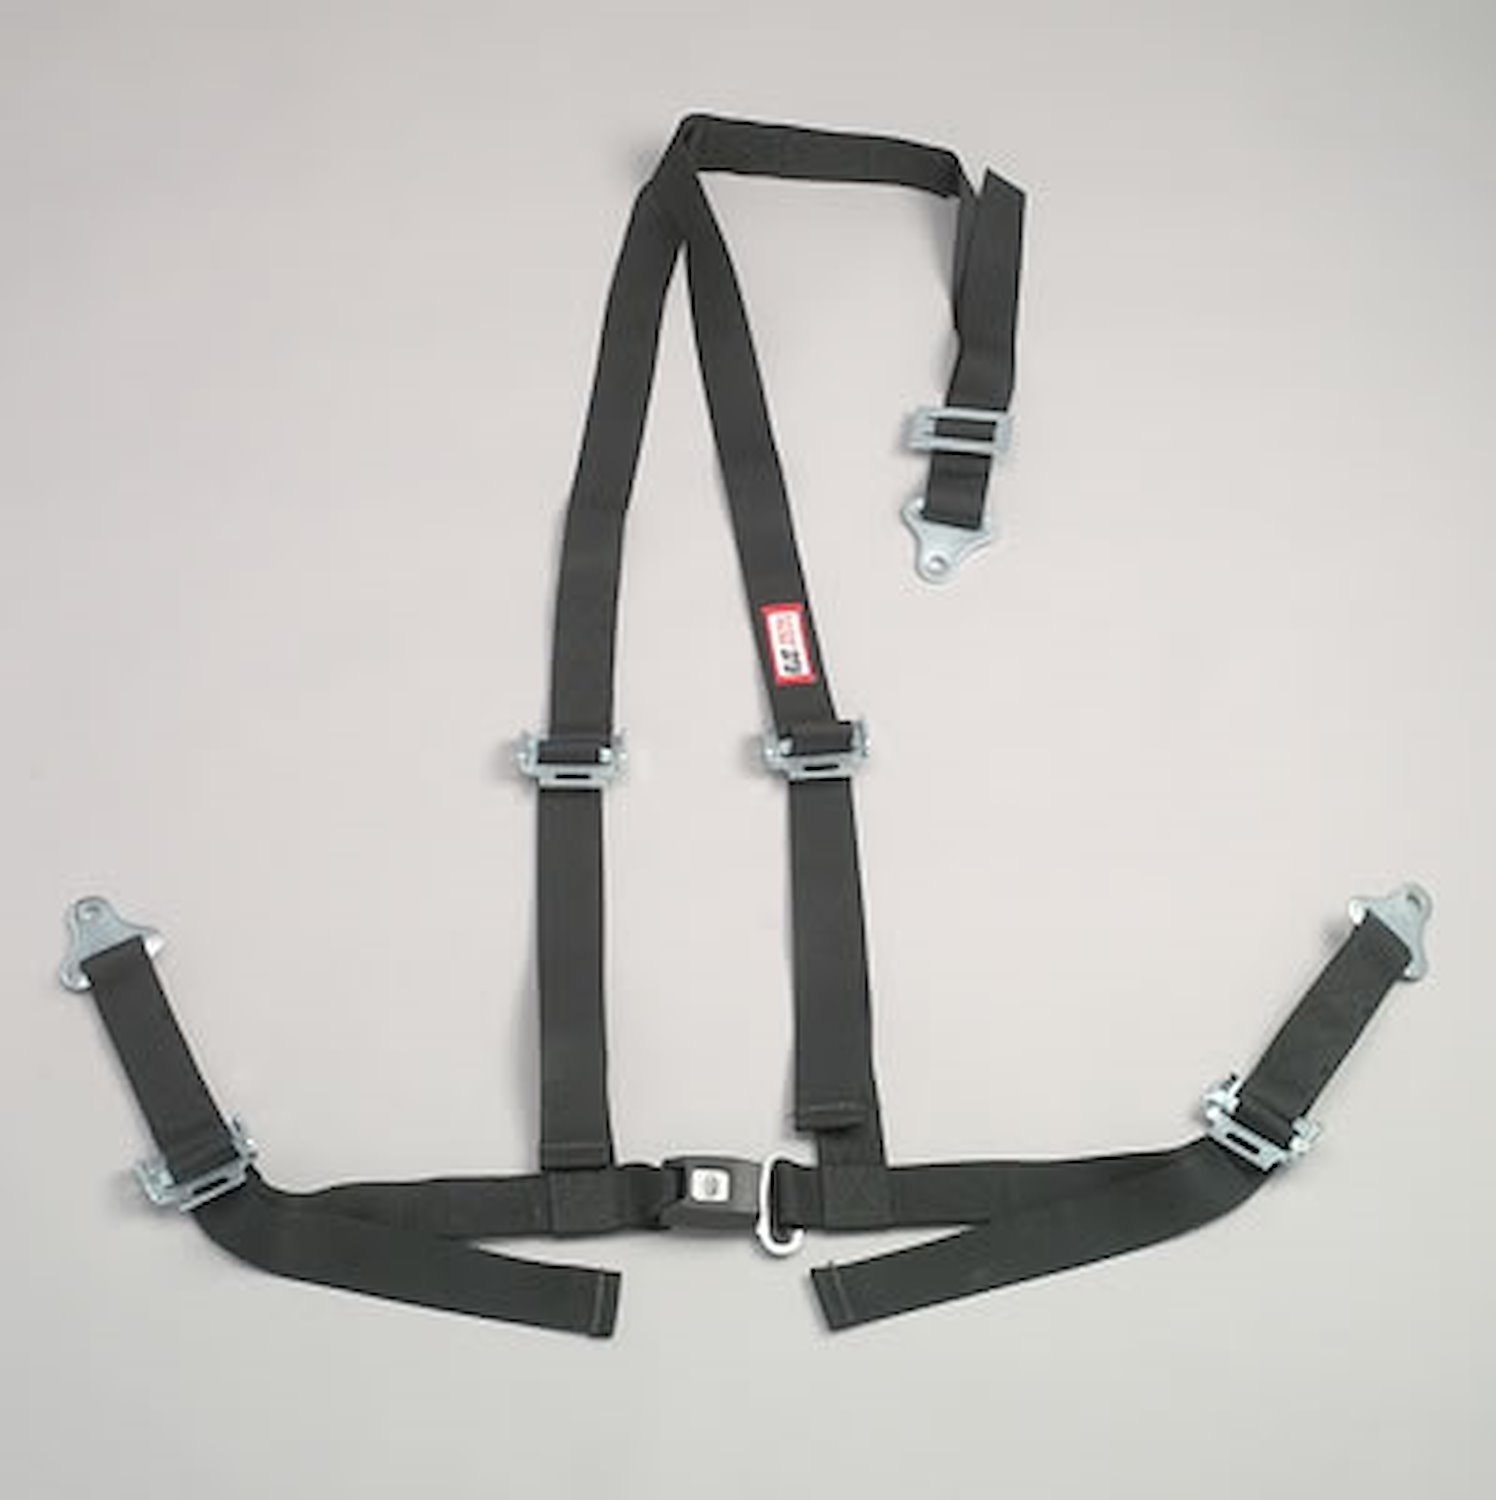 NON-SFI B&T HARNESS 2 PULL DOWN Lap Belt SNAP 2 S. H. Individual FLOOR Mount WRAP/SNAP w/STERNUM STRAP RED